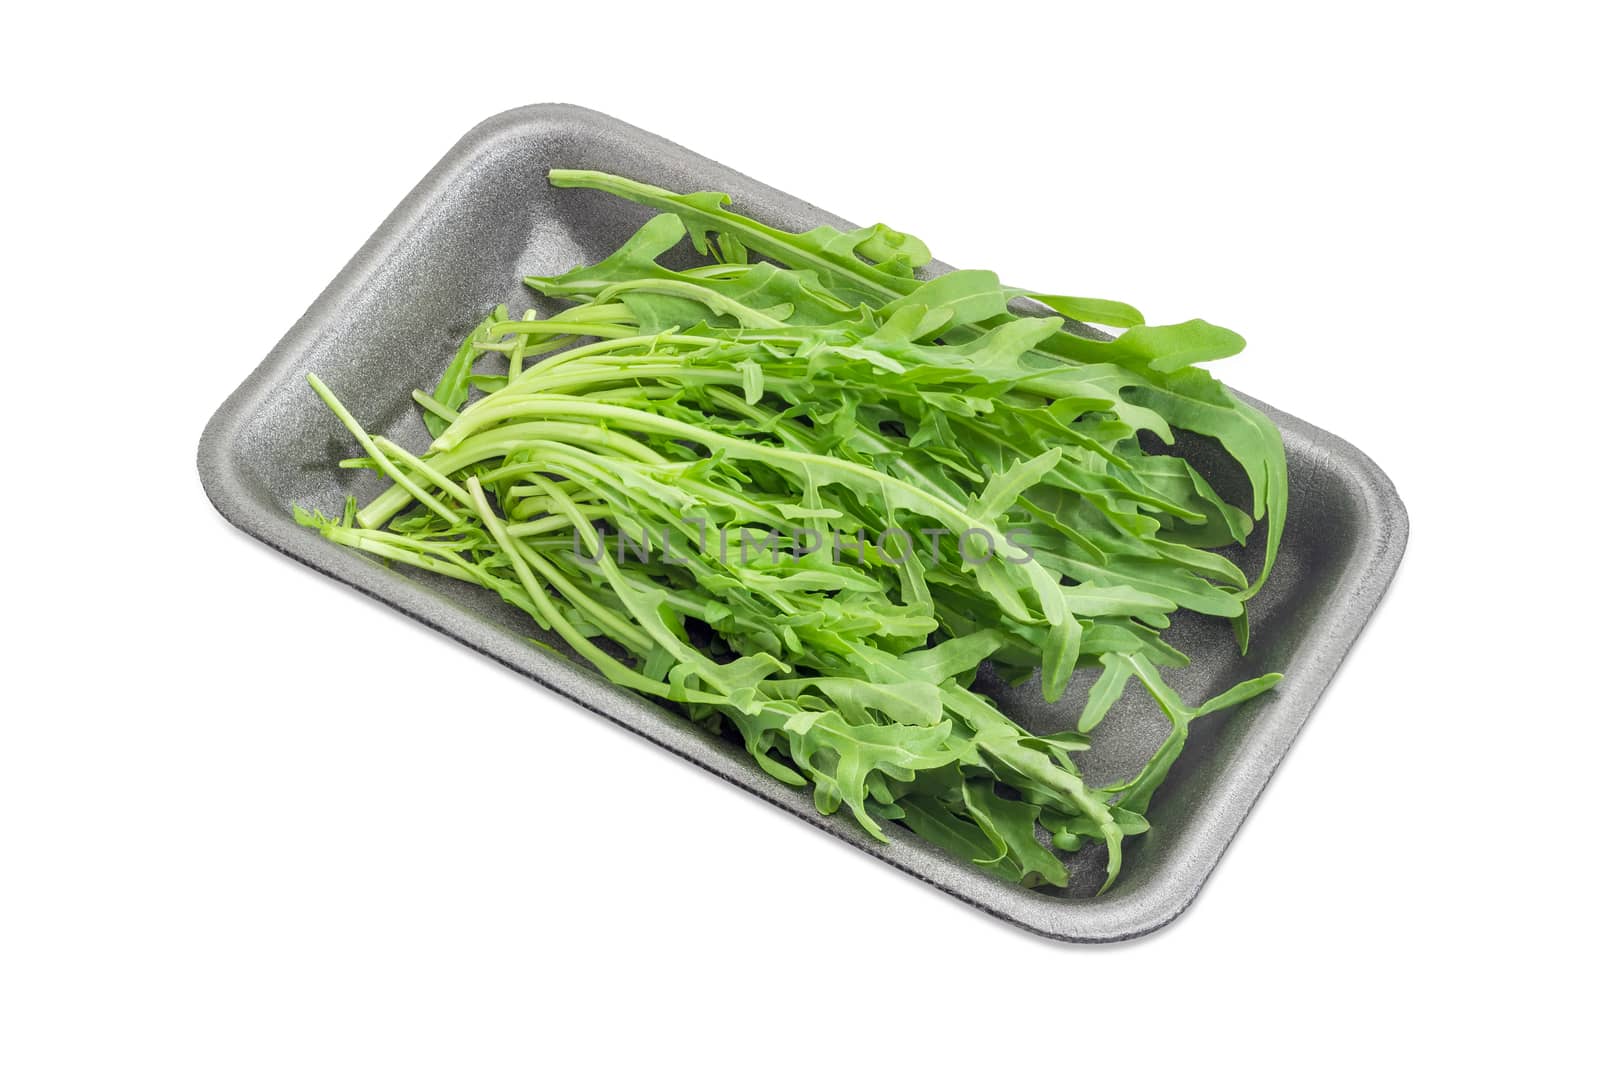 Leaves of the fresh arugula in the dark foam food container on a light background
